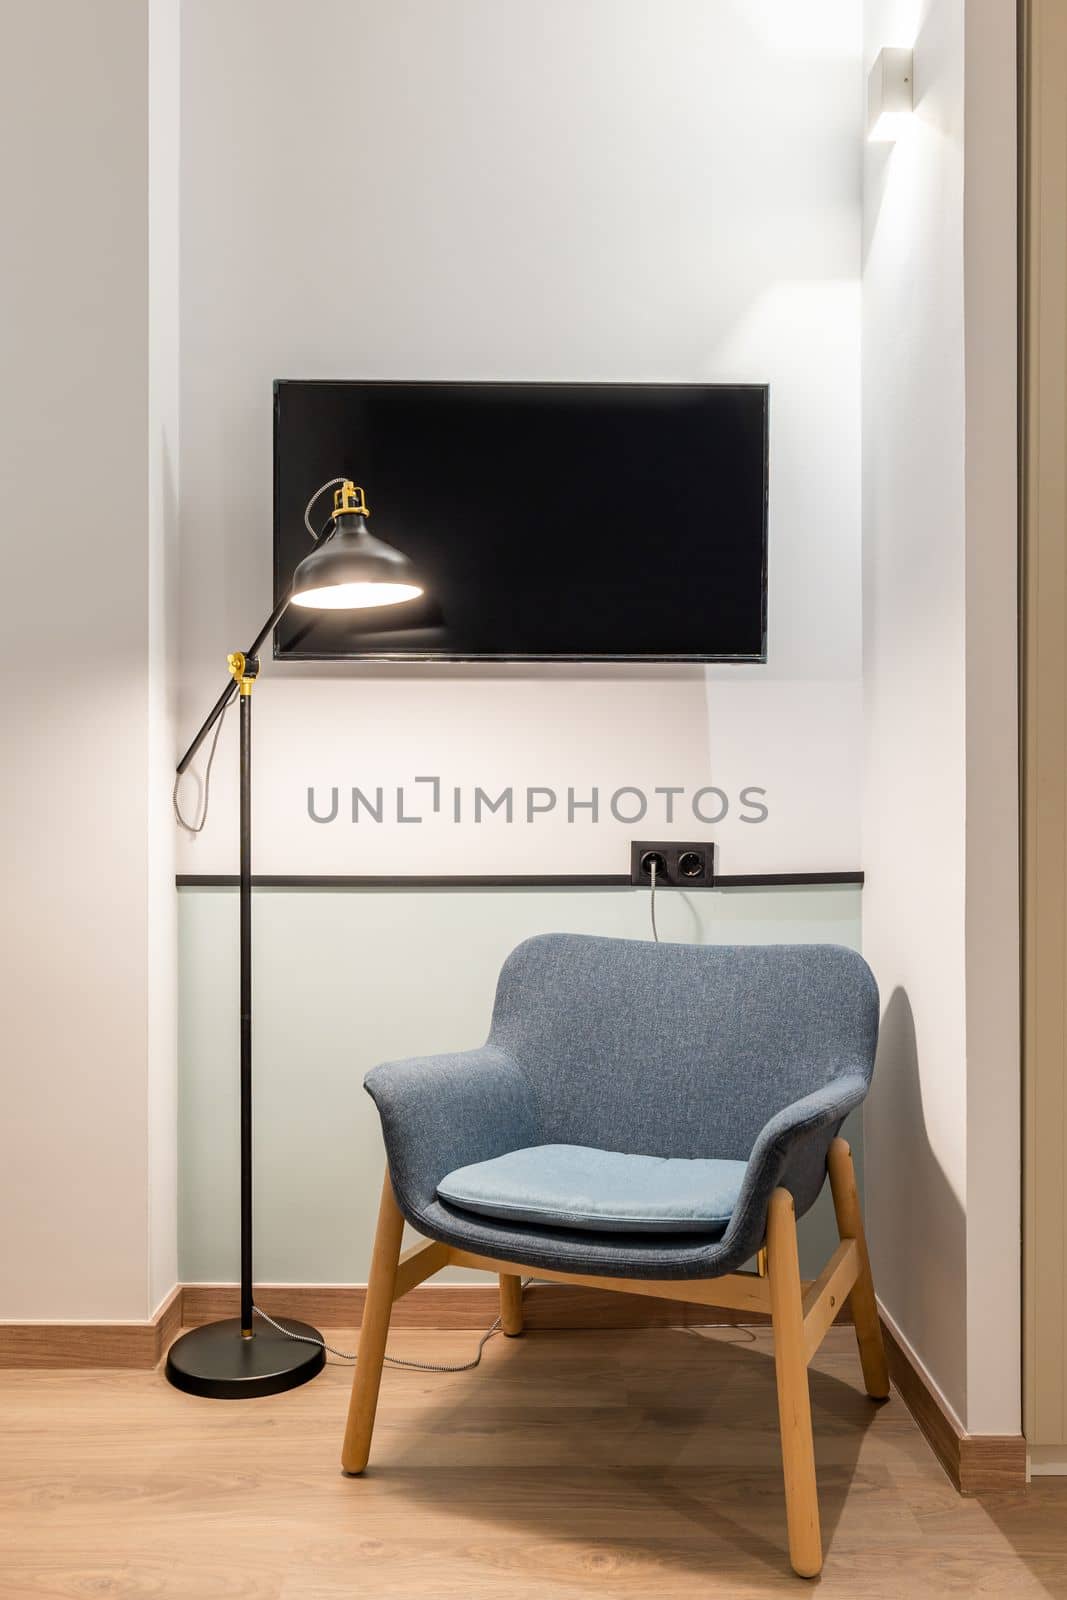 Closeup of modern comfortable armchair with dark blue upholstery bright ceiling lights and metal floor lamp in room with white walls and wooden parquet. Behind TV on wall for watching shows. by apavlin